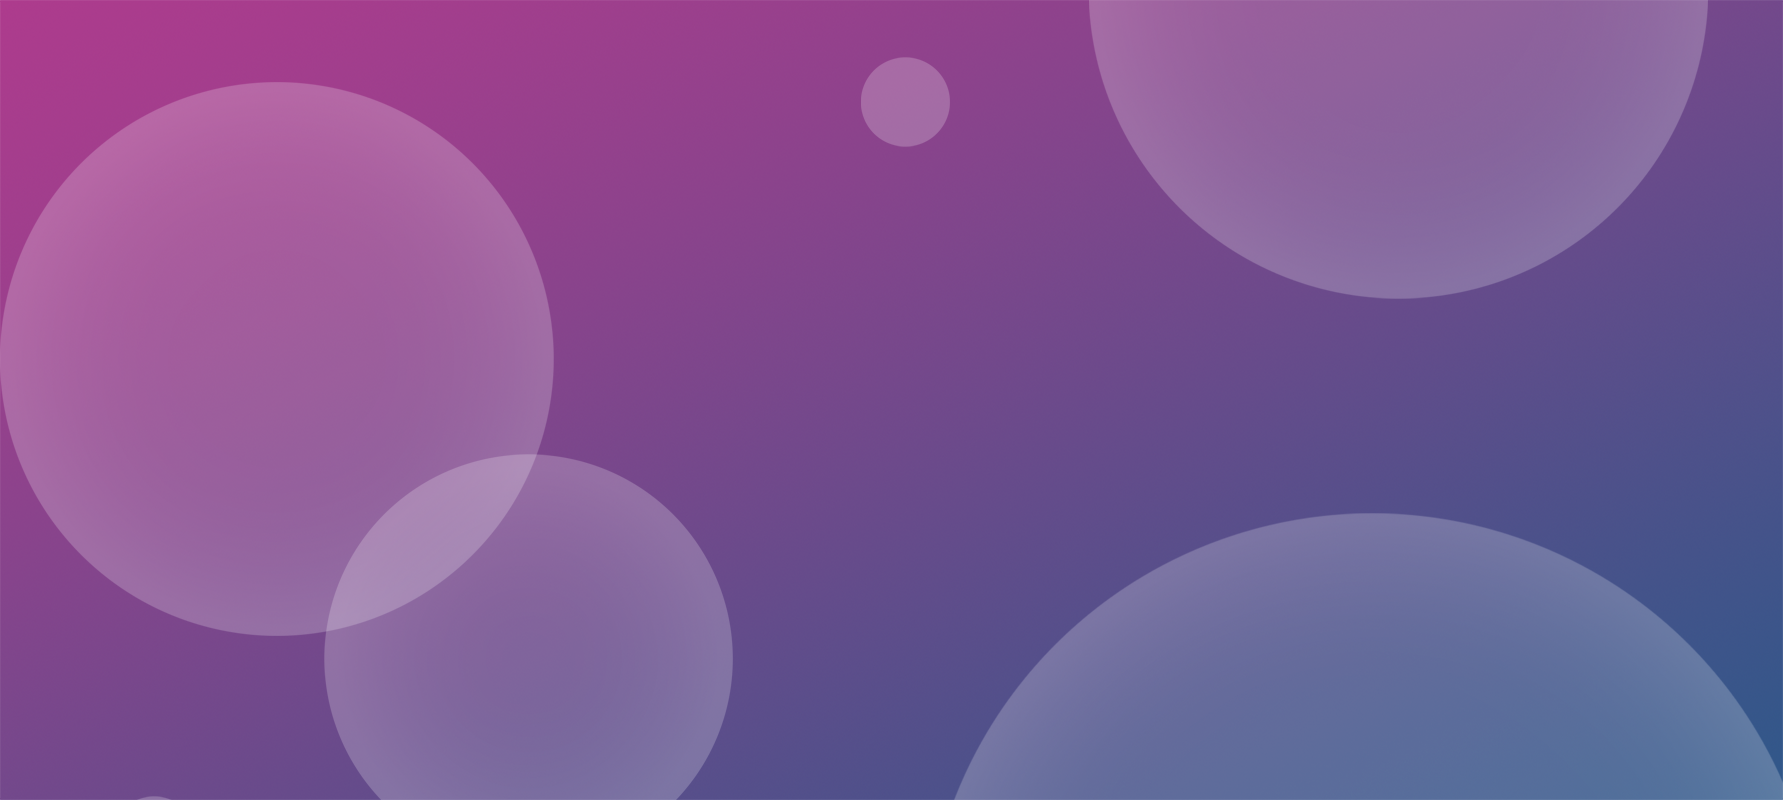 A purple and blue background with circles on it.